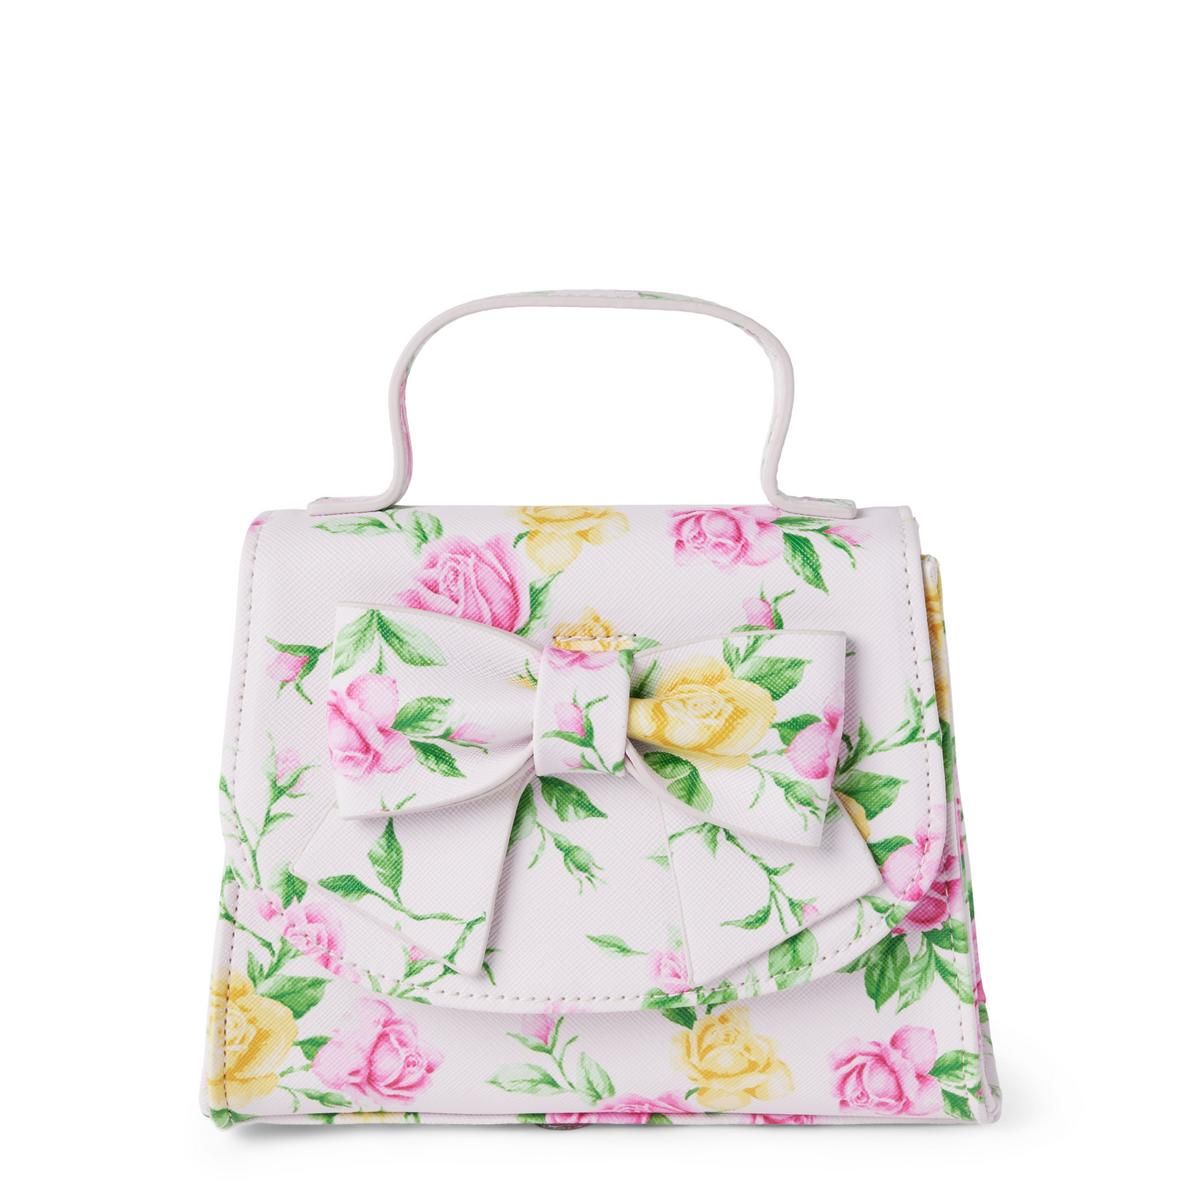 Floral Bow Purse | Janie and Jack